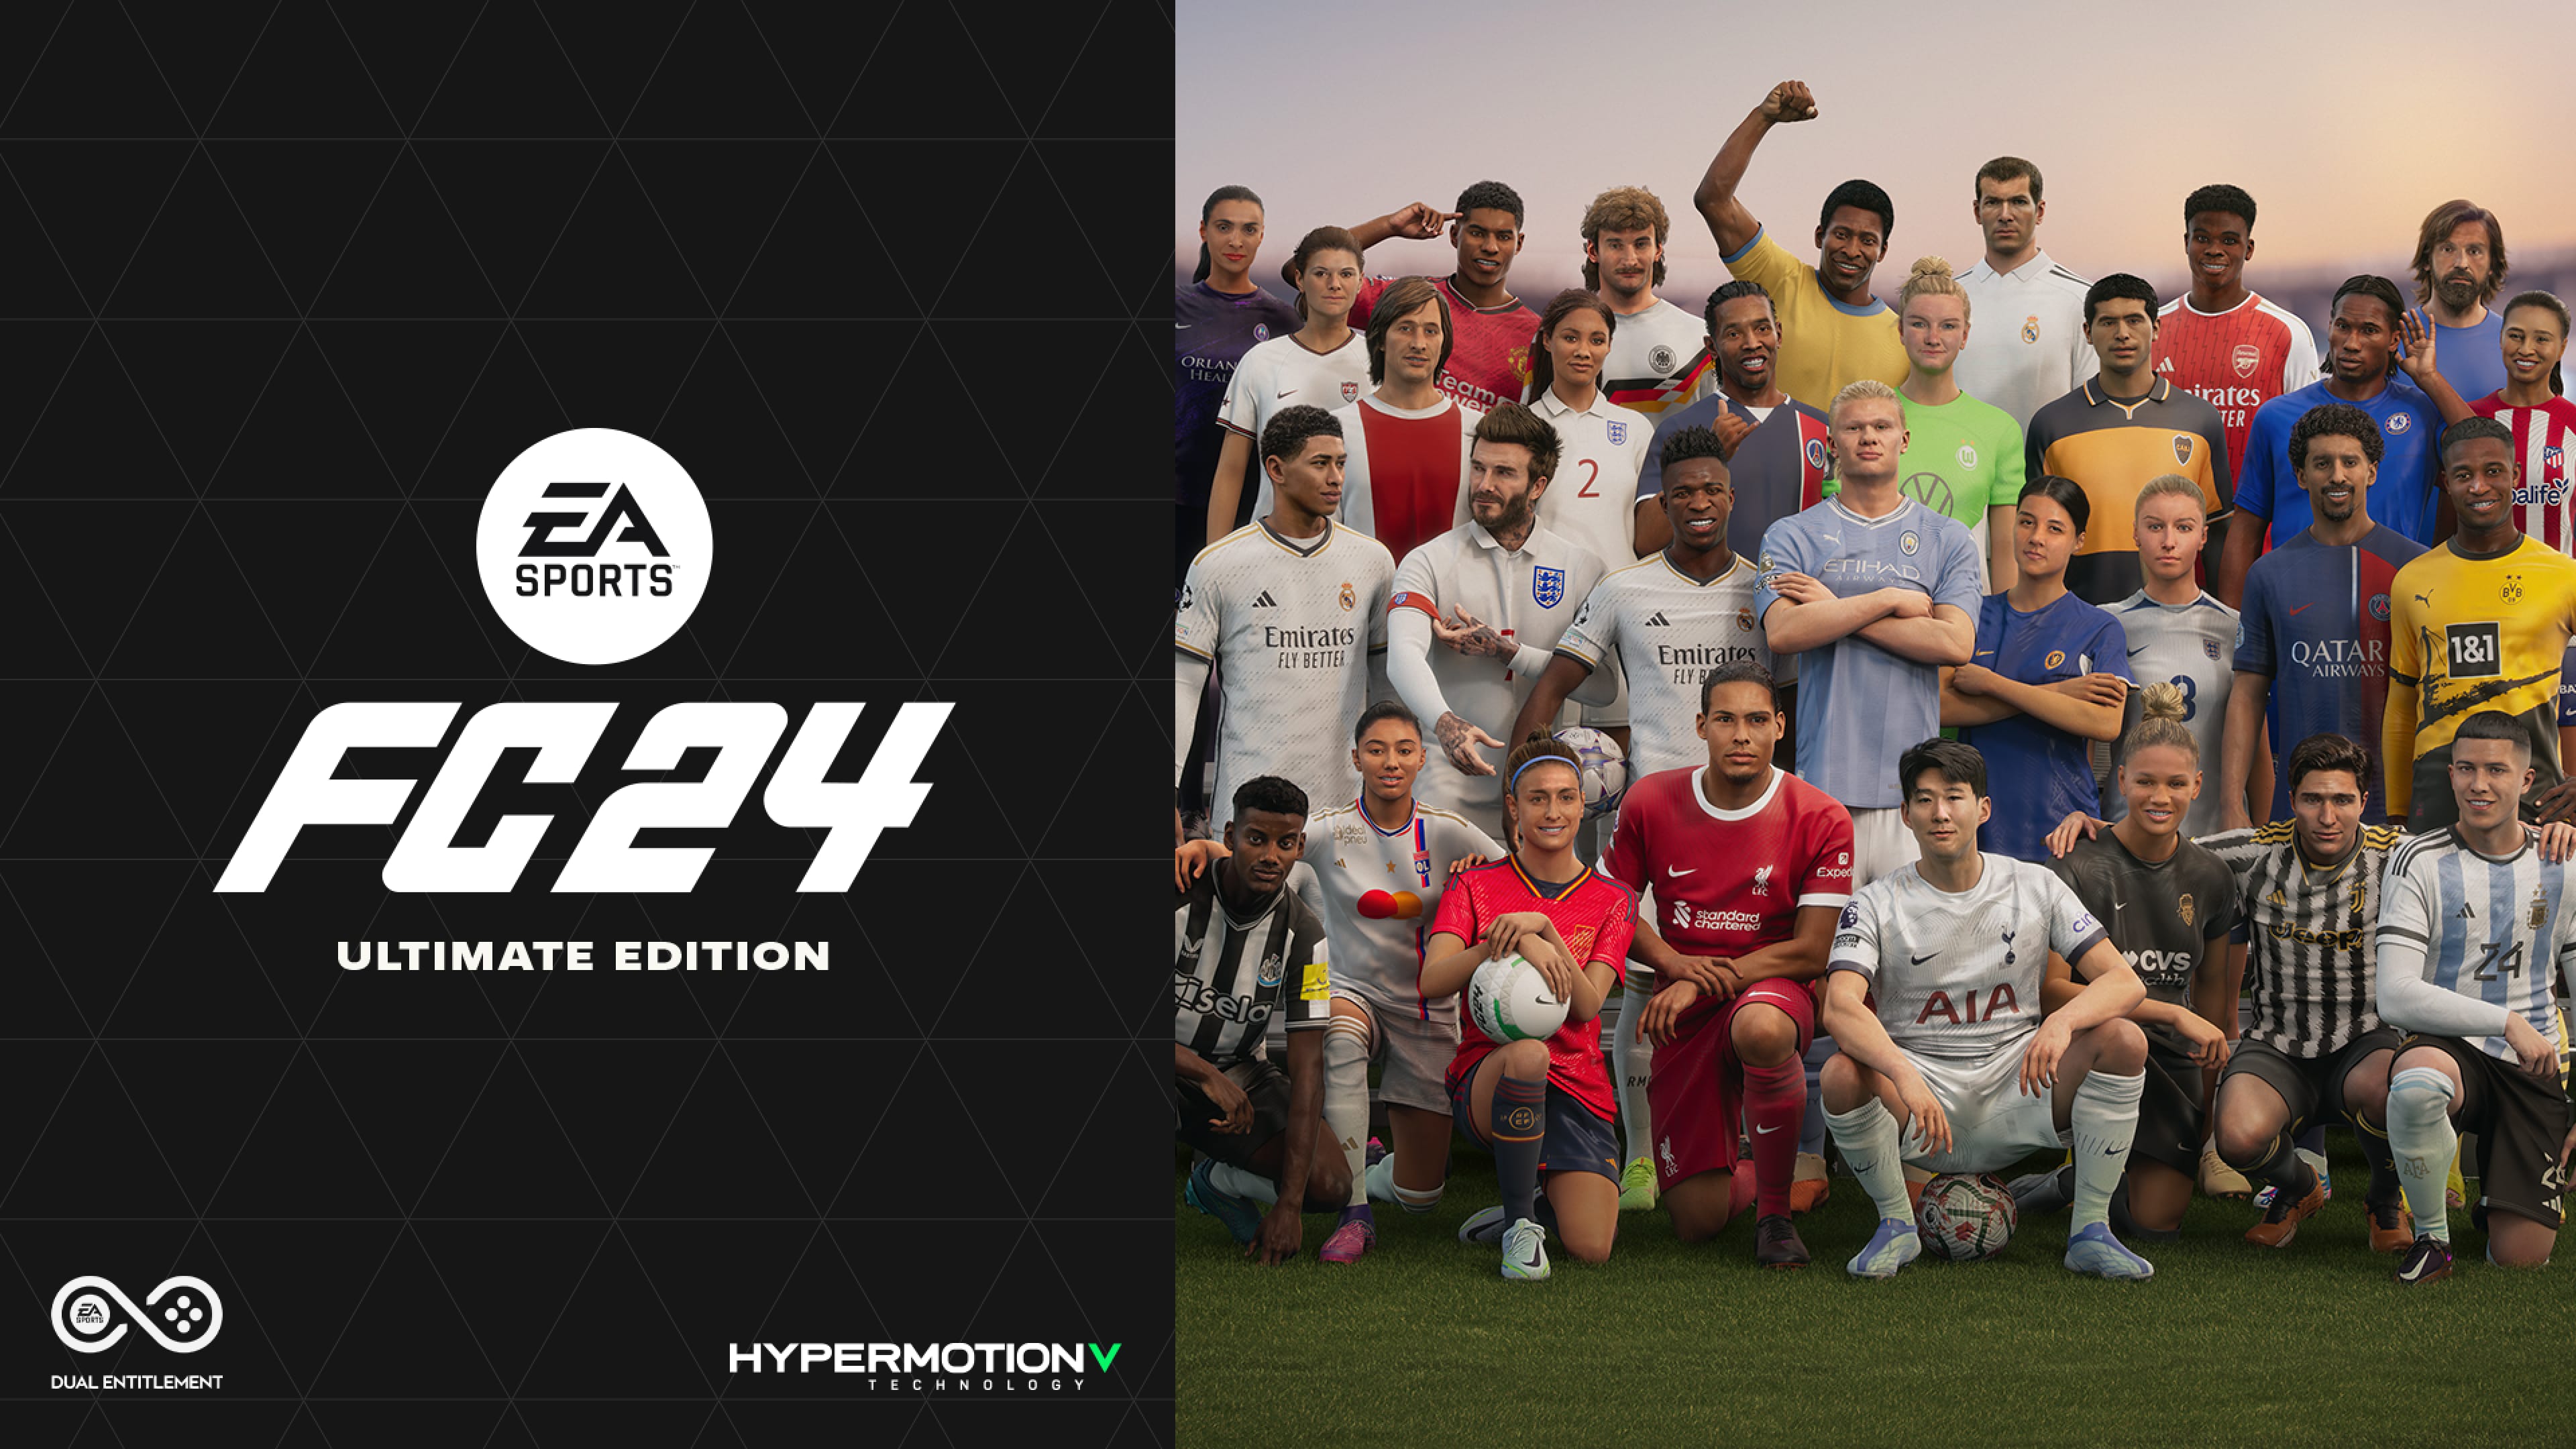 FIFA 23 price, Standard & Ultimate Edition difference, pre-order cost